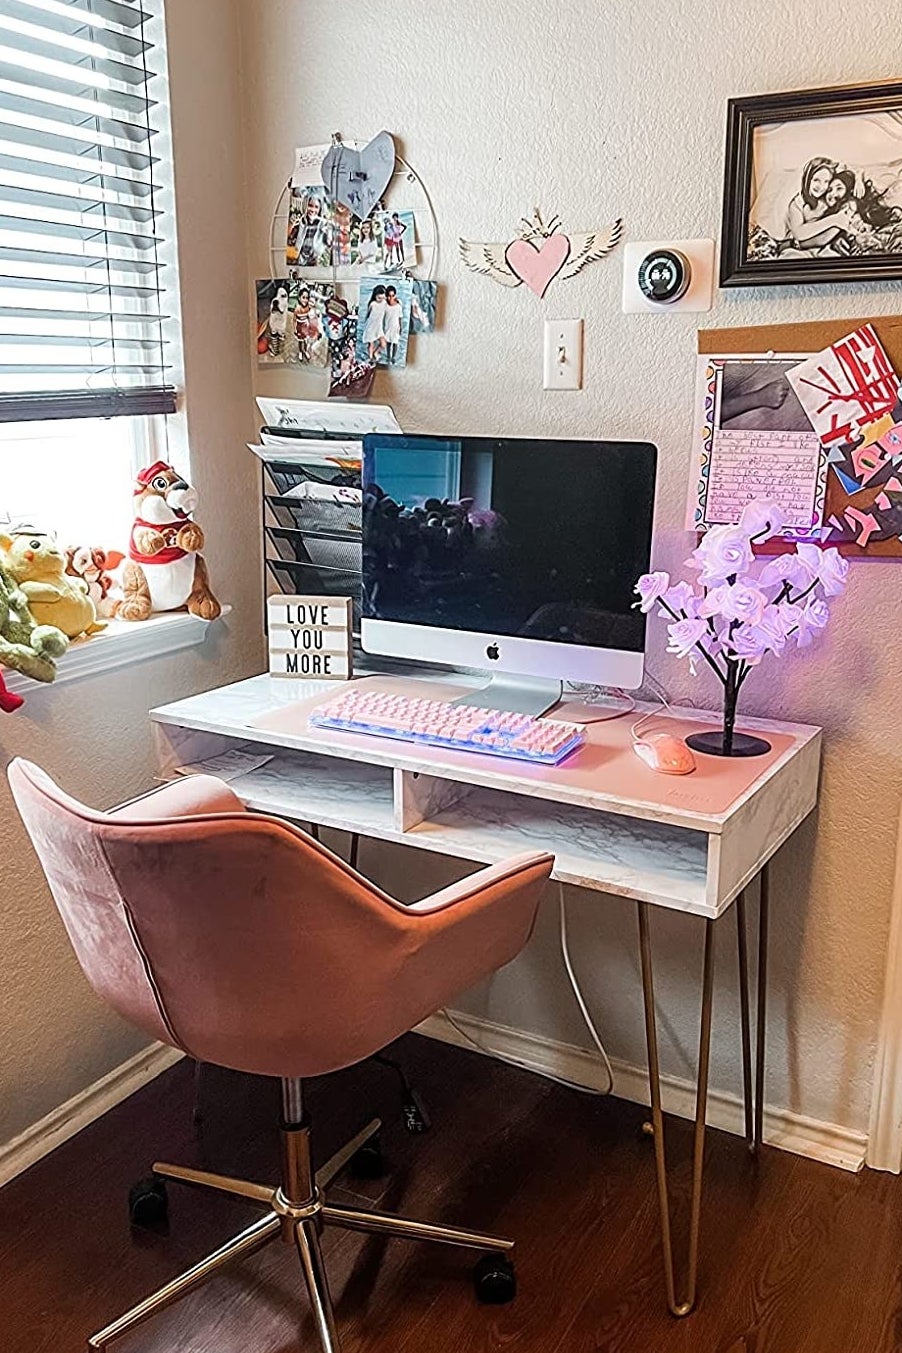 6 Cool Office Decor Ideas to Make Your Workspace Instagrammable